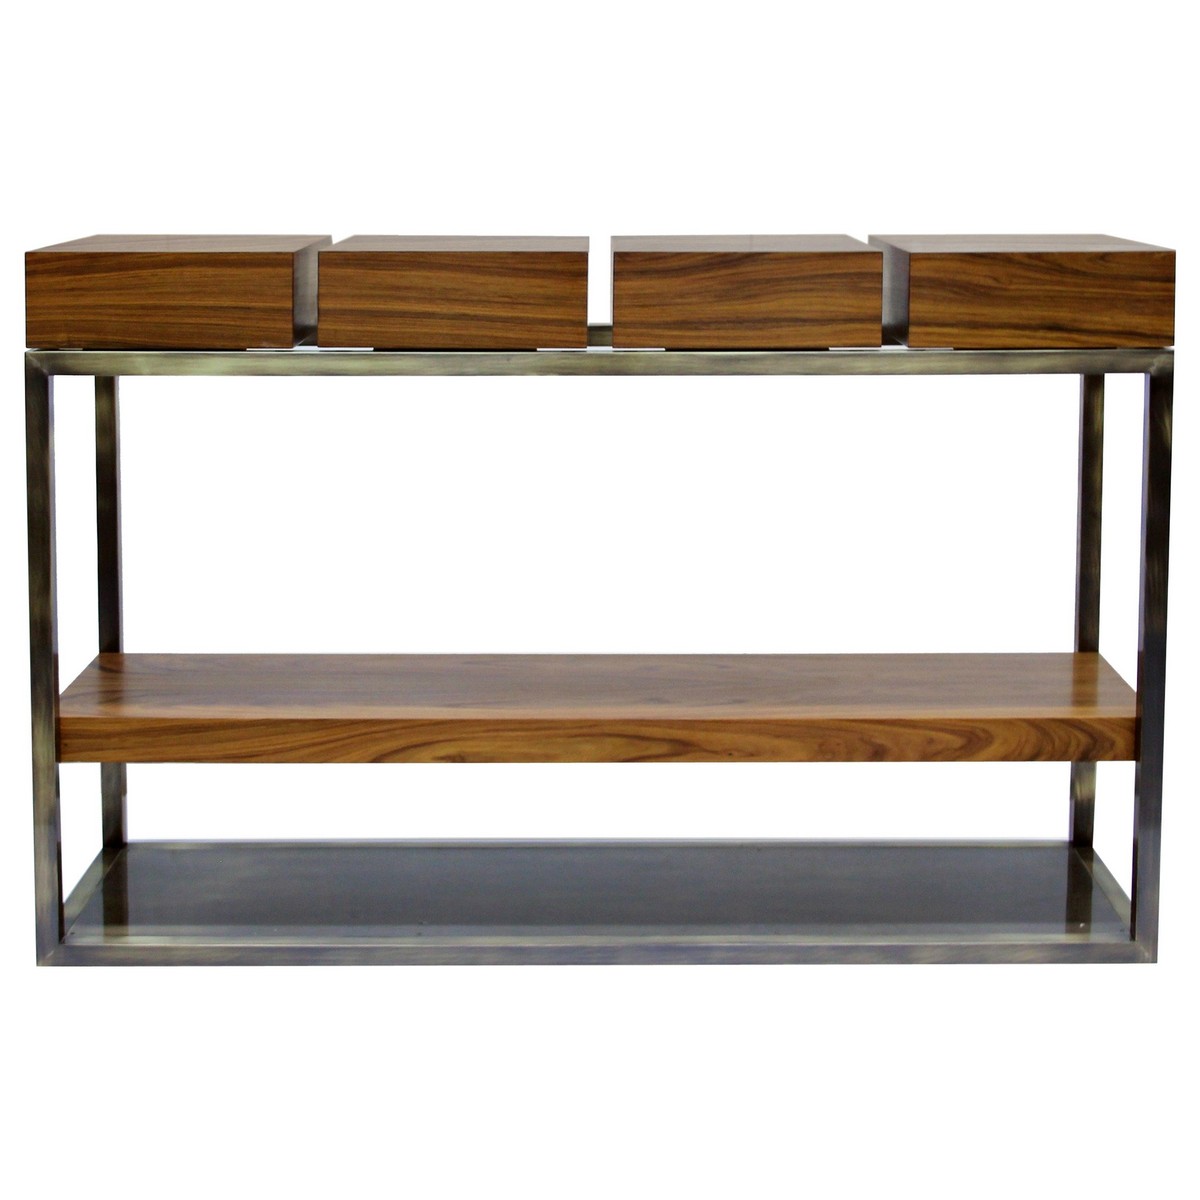 Covet House: Top Console Tables at Salone del Mobile Milano